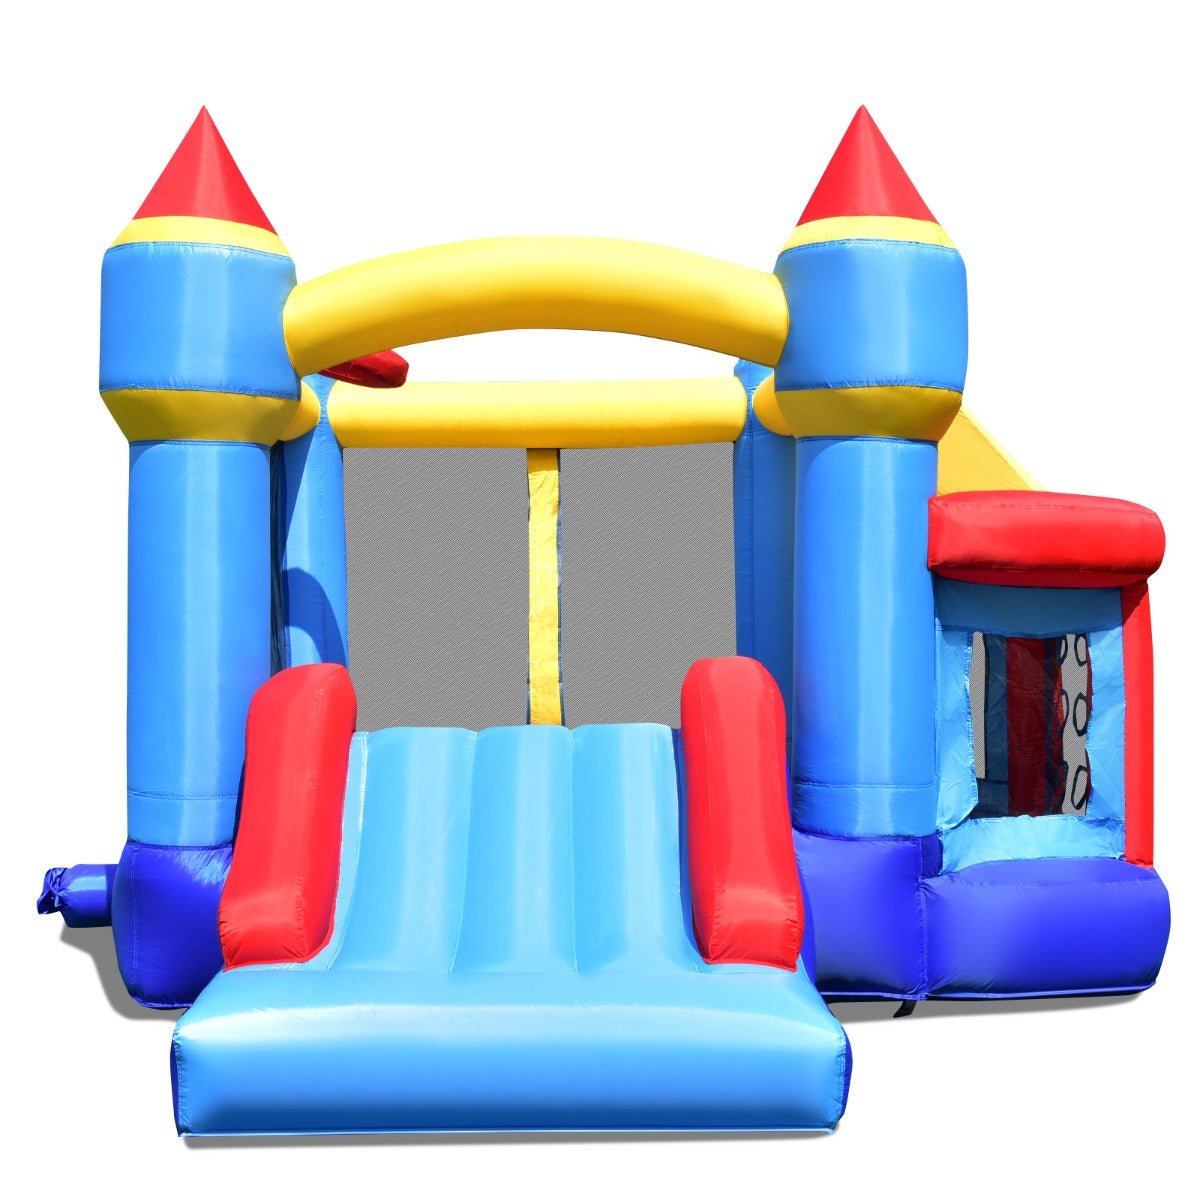 Playful Adventures: Inflatable Bounce House with Slide for Backyard (Blower)